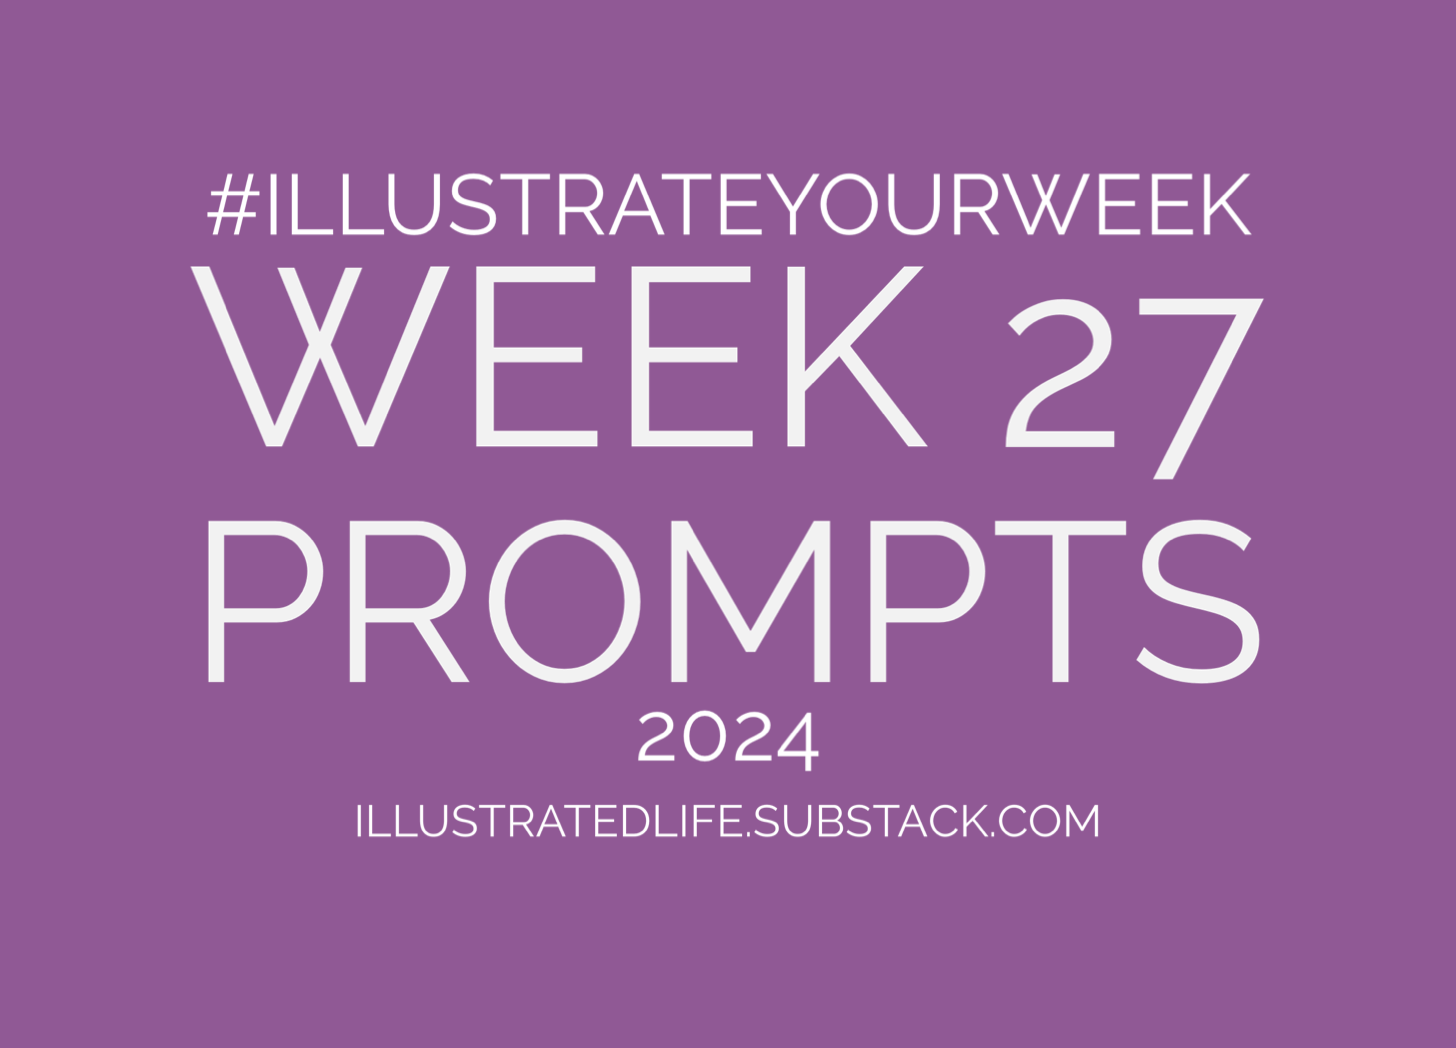 Week 27 Prompts for Illustrate Your Week 2024